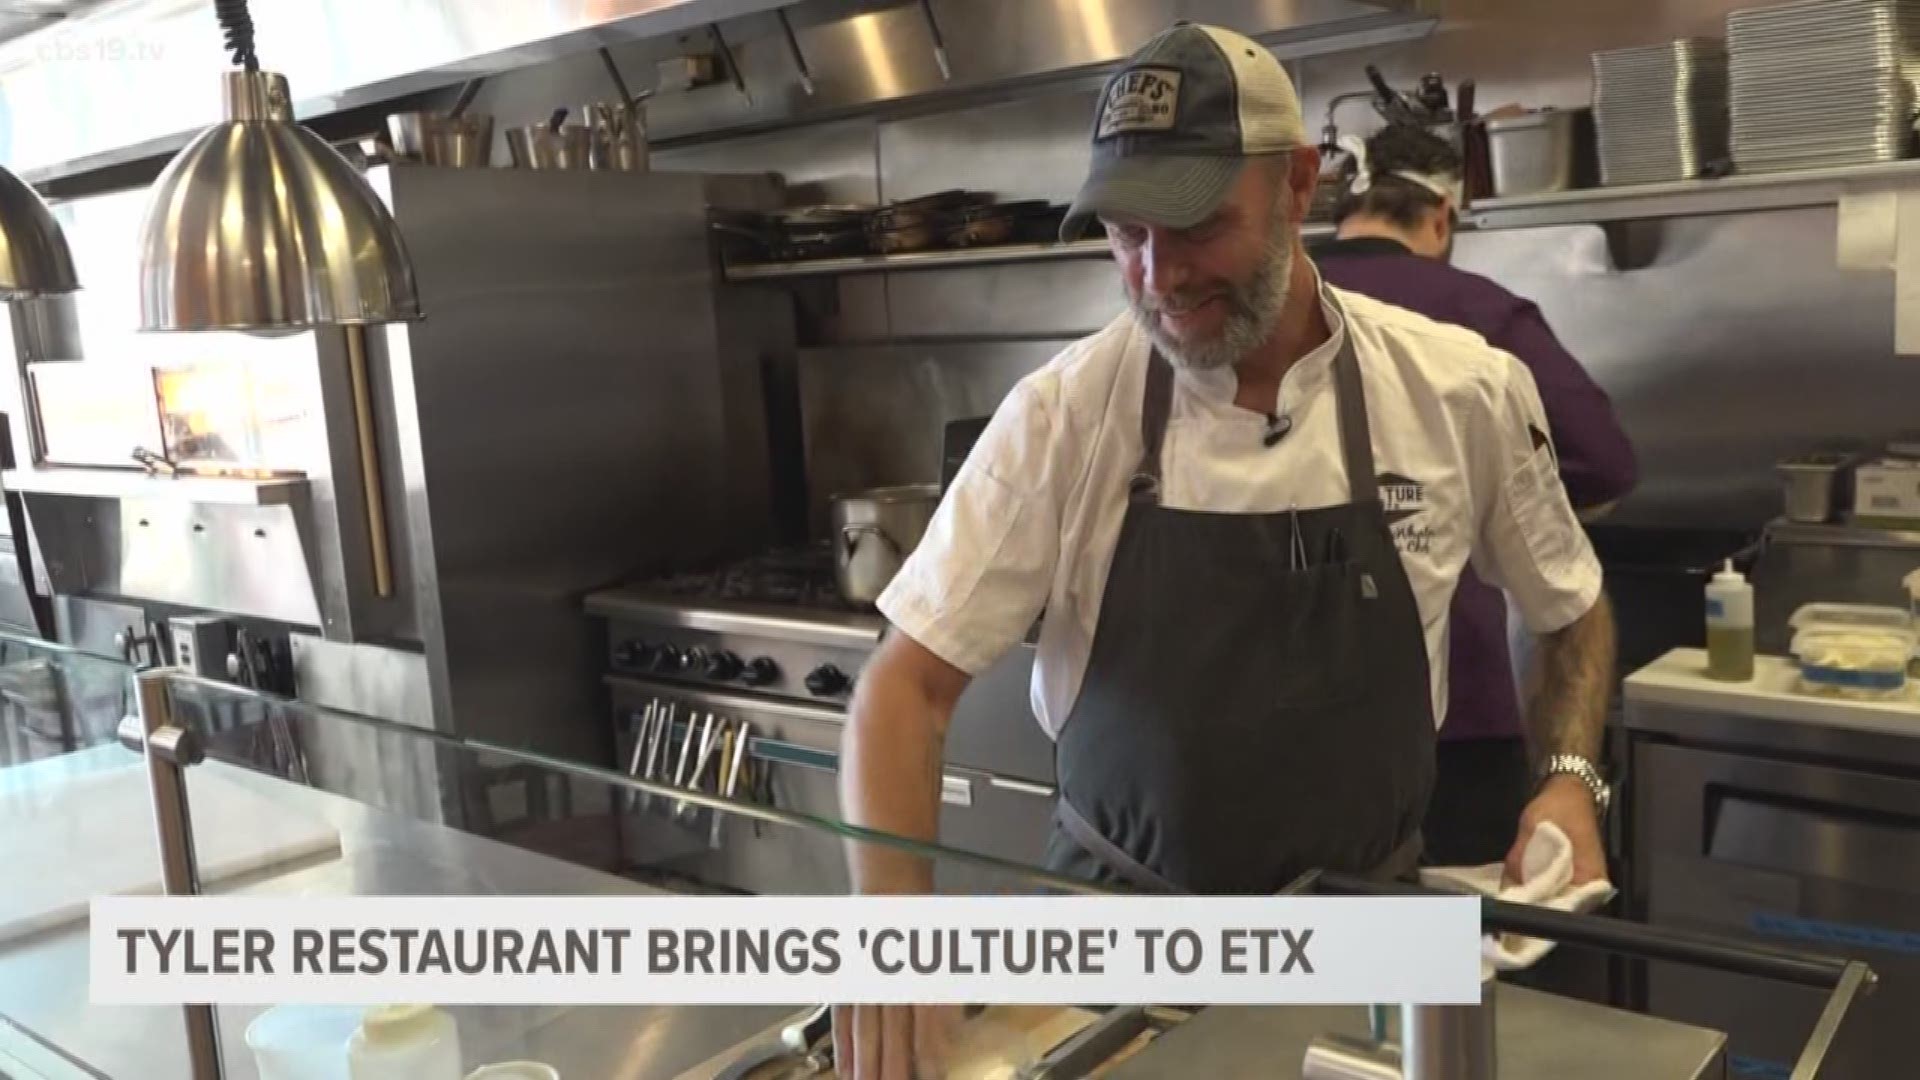 The newest restaurant in Downtown Tyler is hoping to bring some culture to the East Texas food scene.